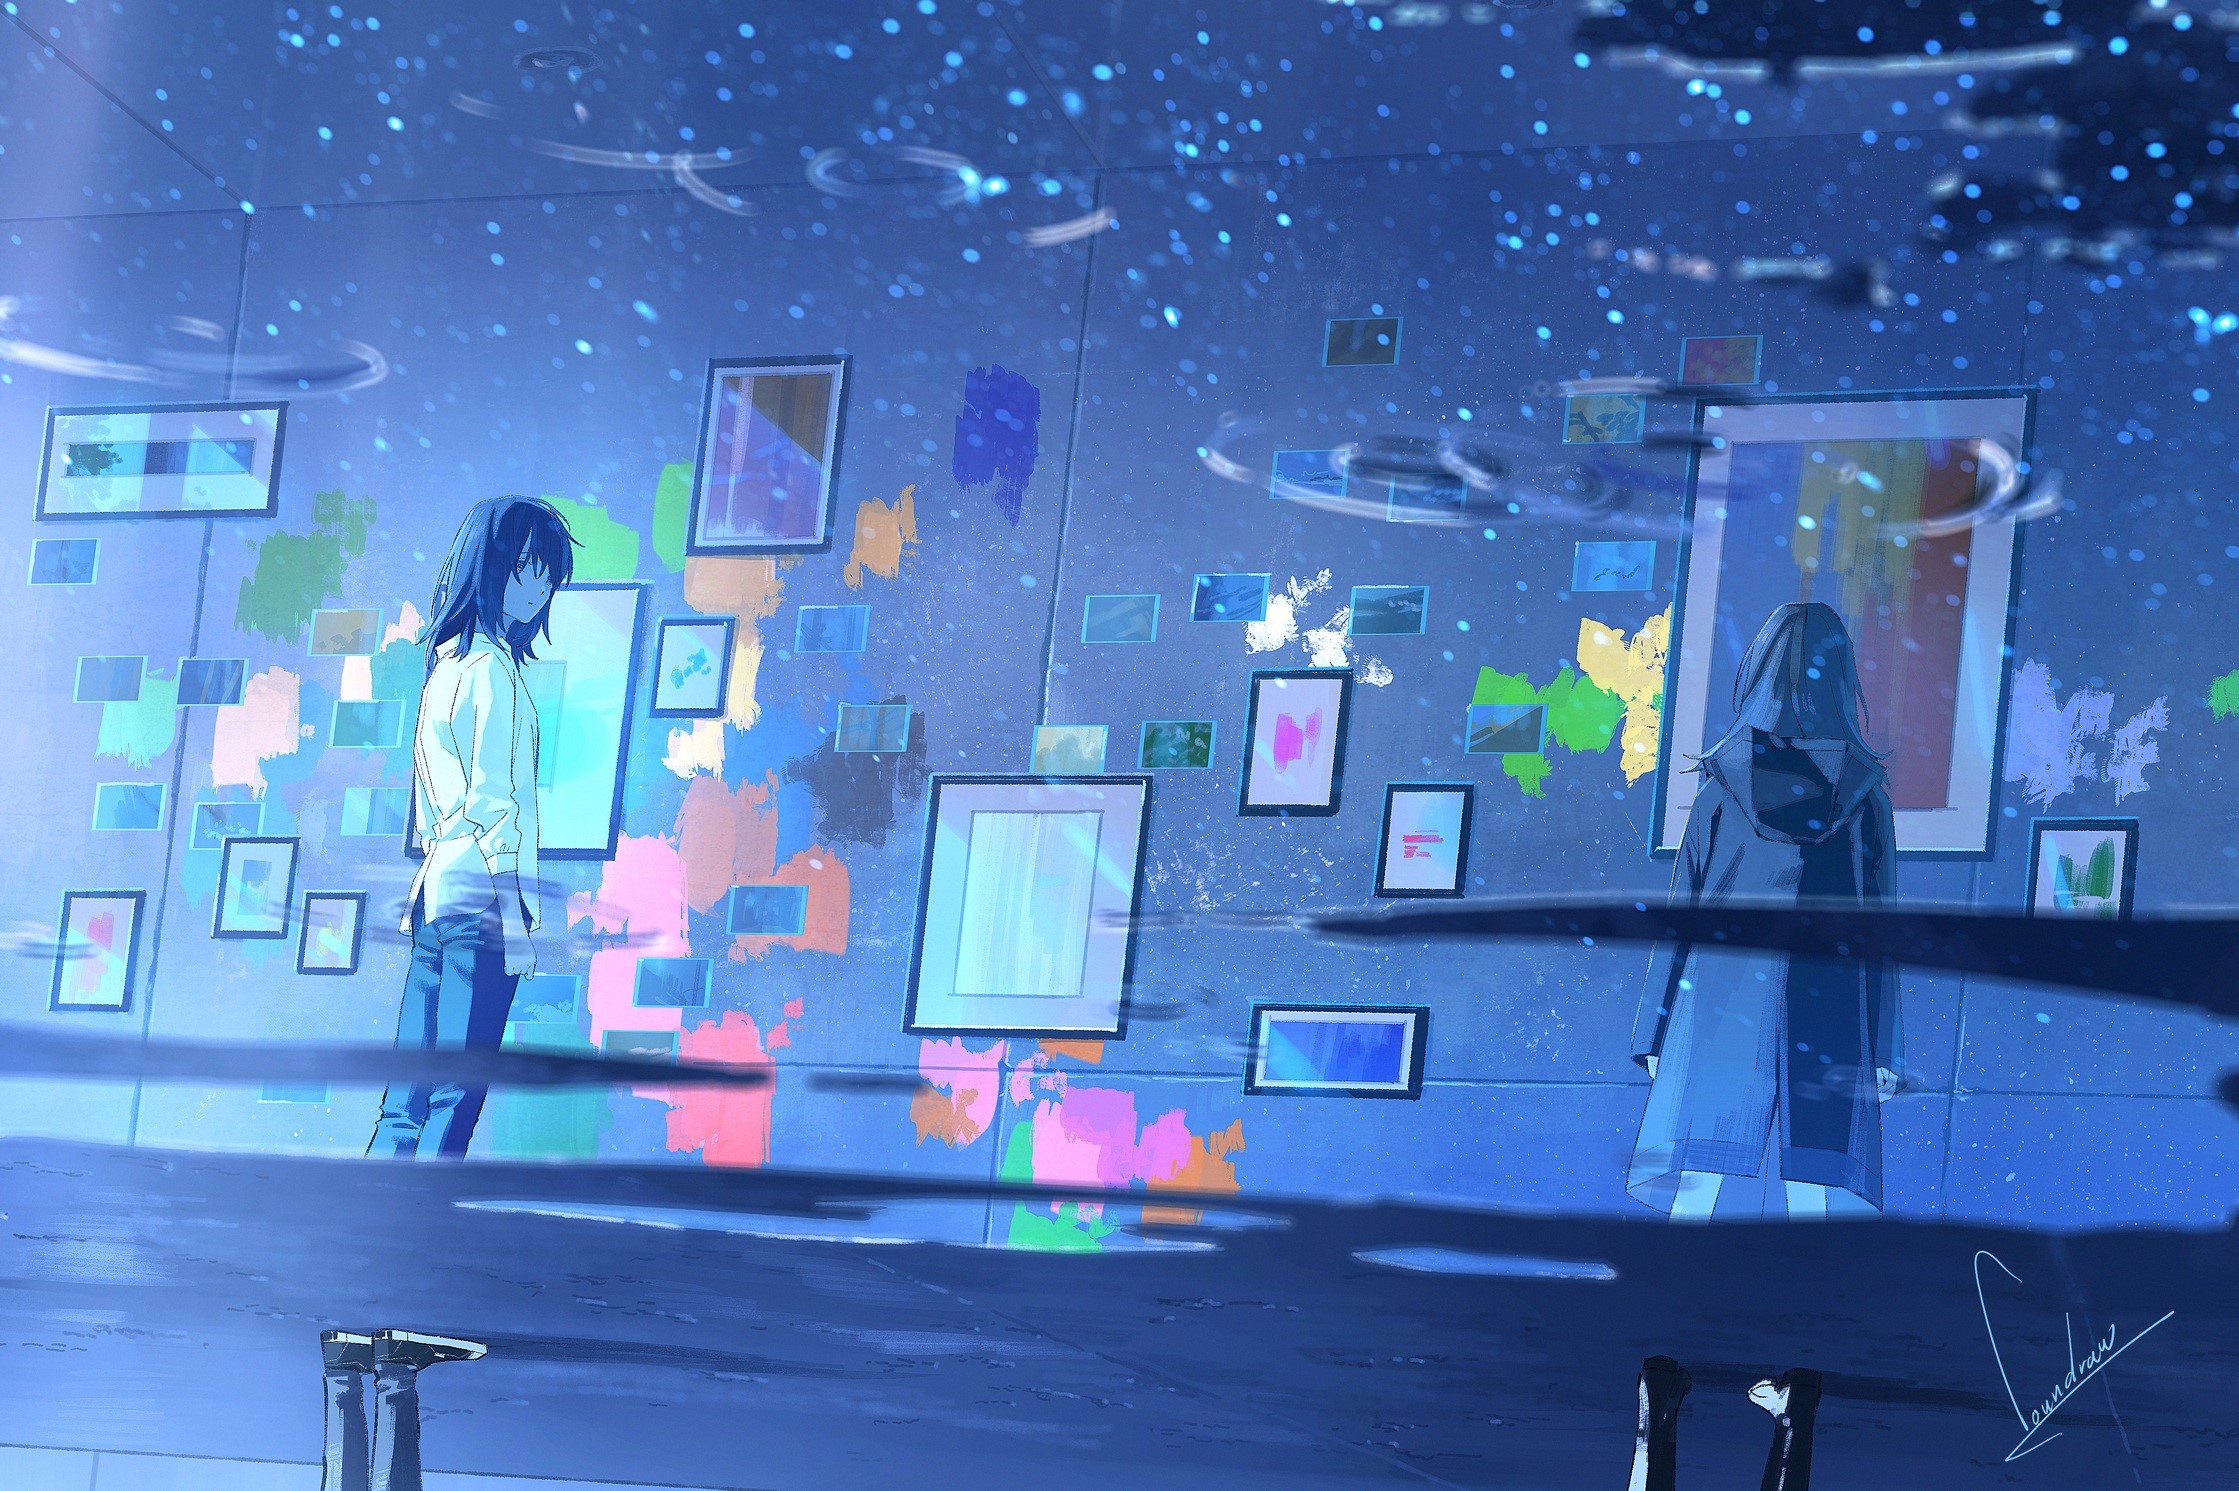 A person standing in front of a wall of screens - Blue anime